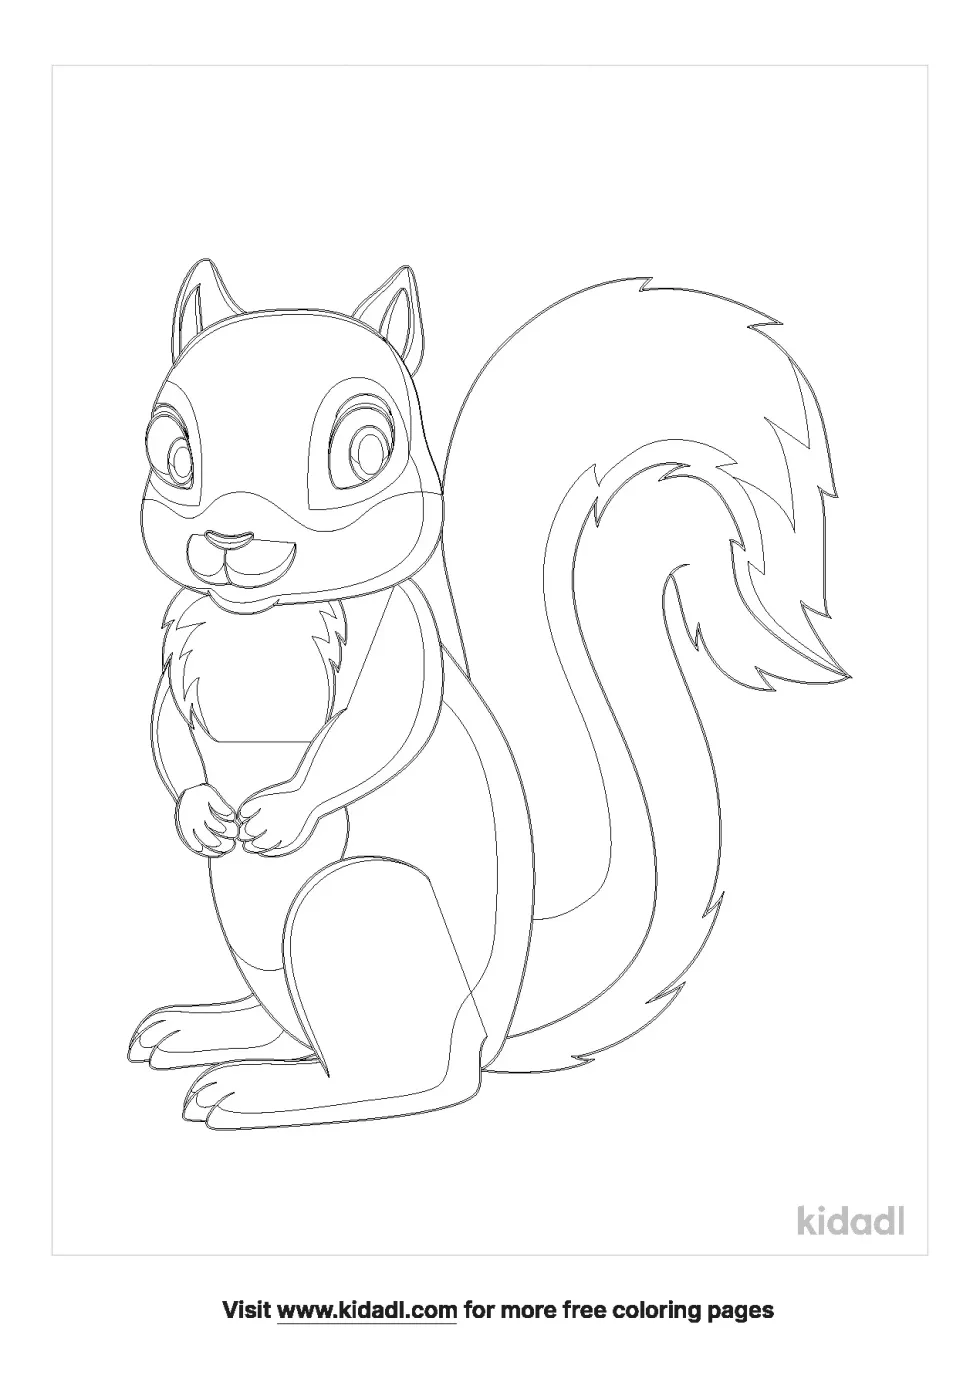 Albert And Kaibab Squirrels Coloring Page